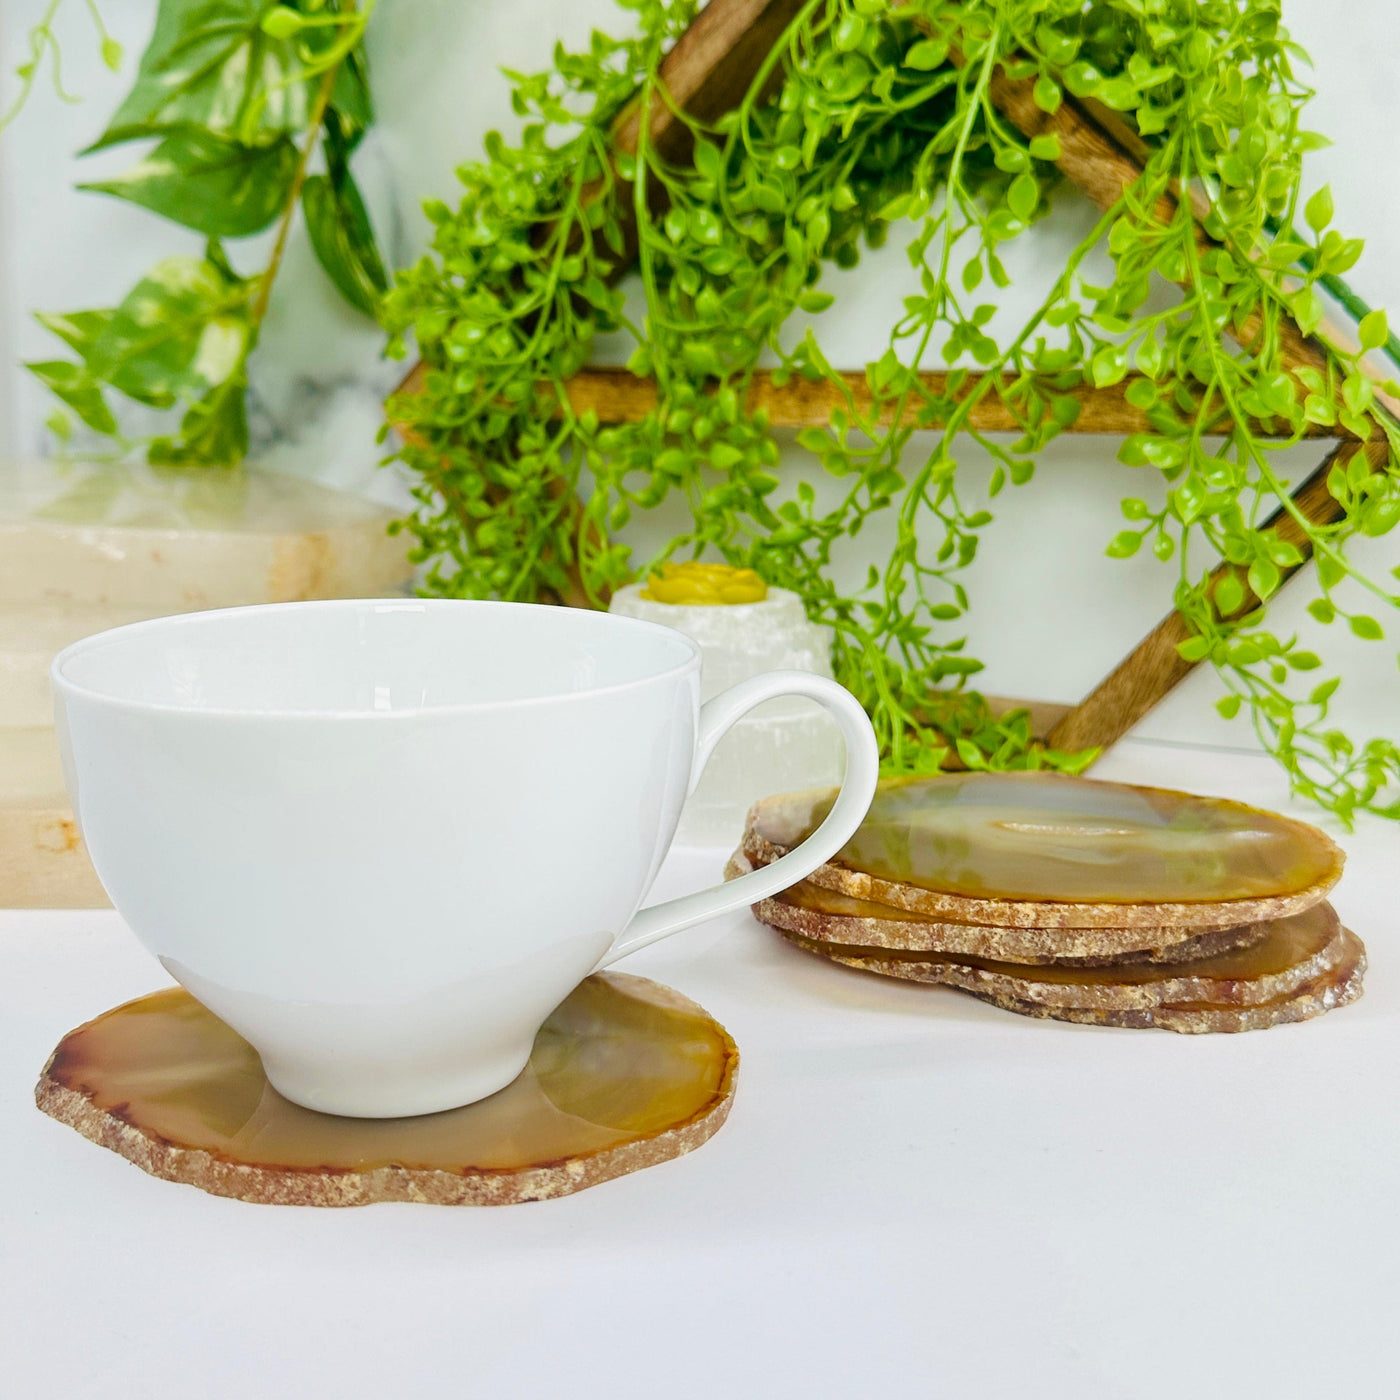 Iris Agate Slice Set - Six Agate Crystal Slices used as a coaster with white cup with props and plants in background